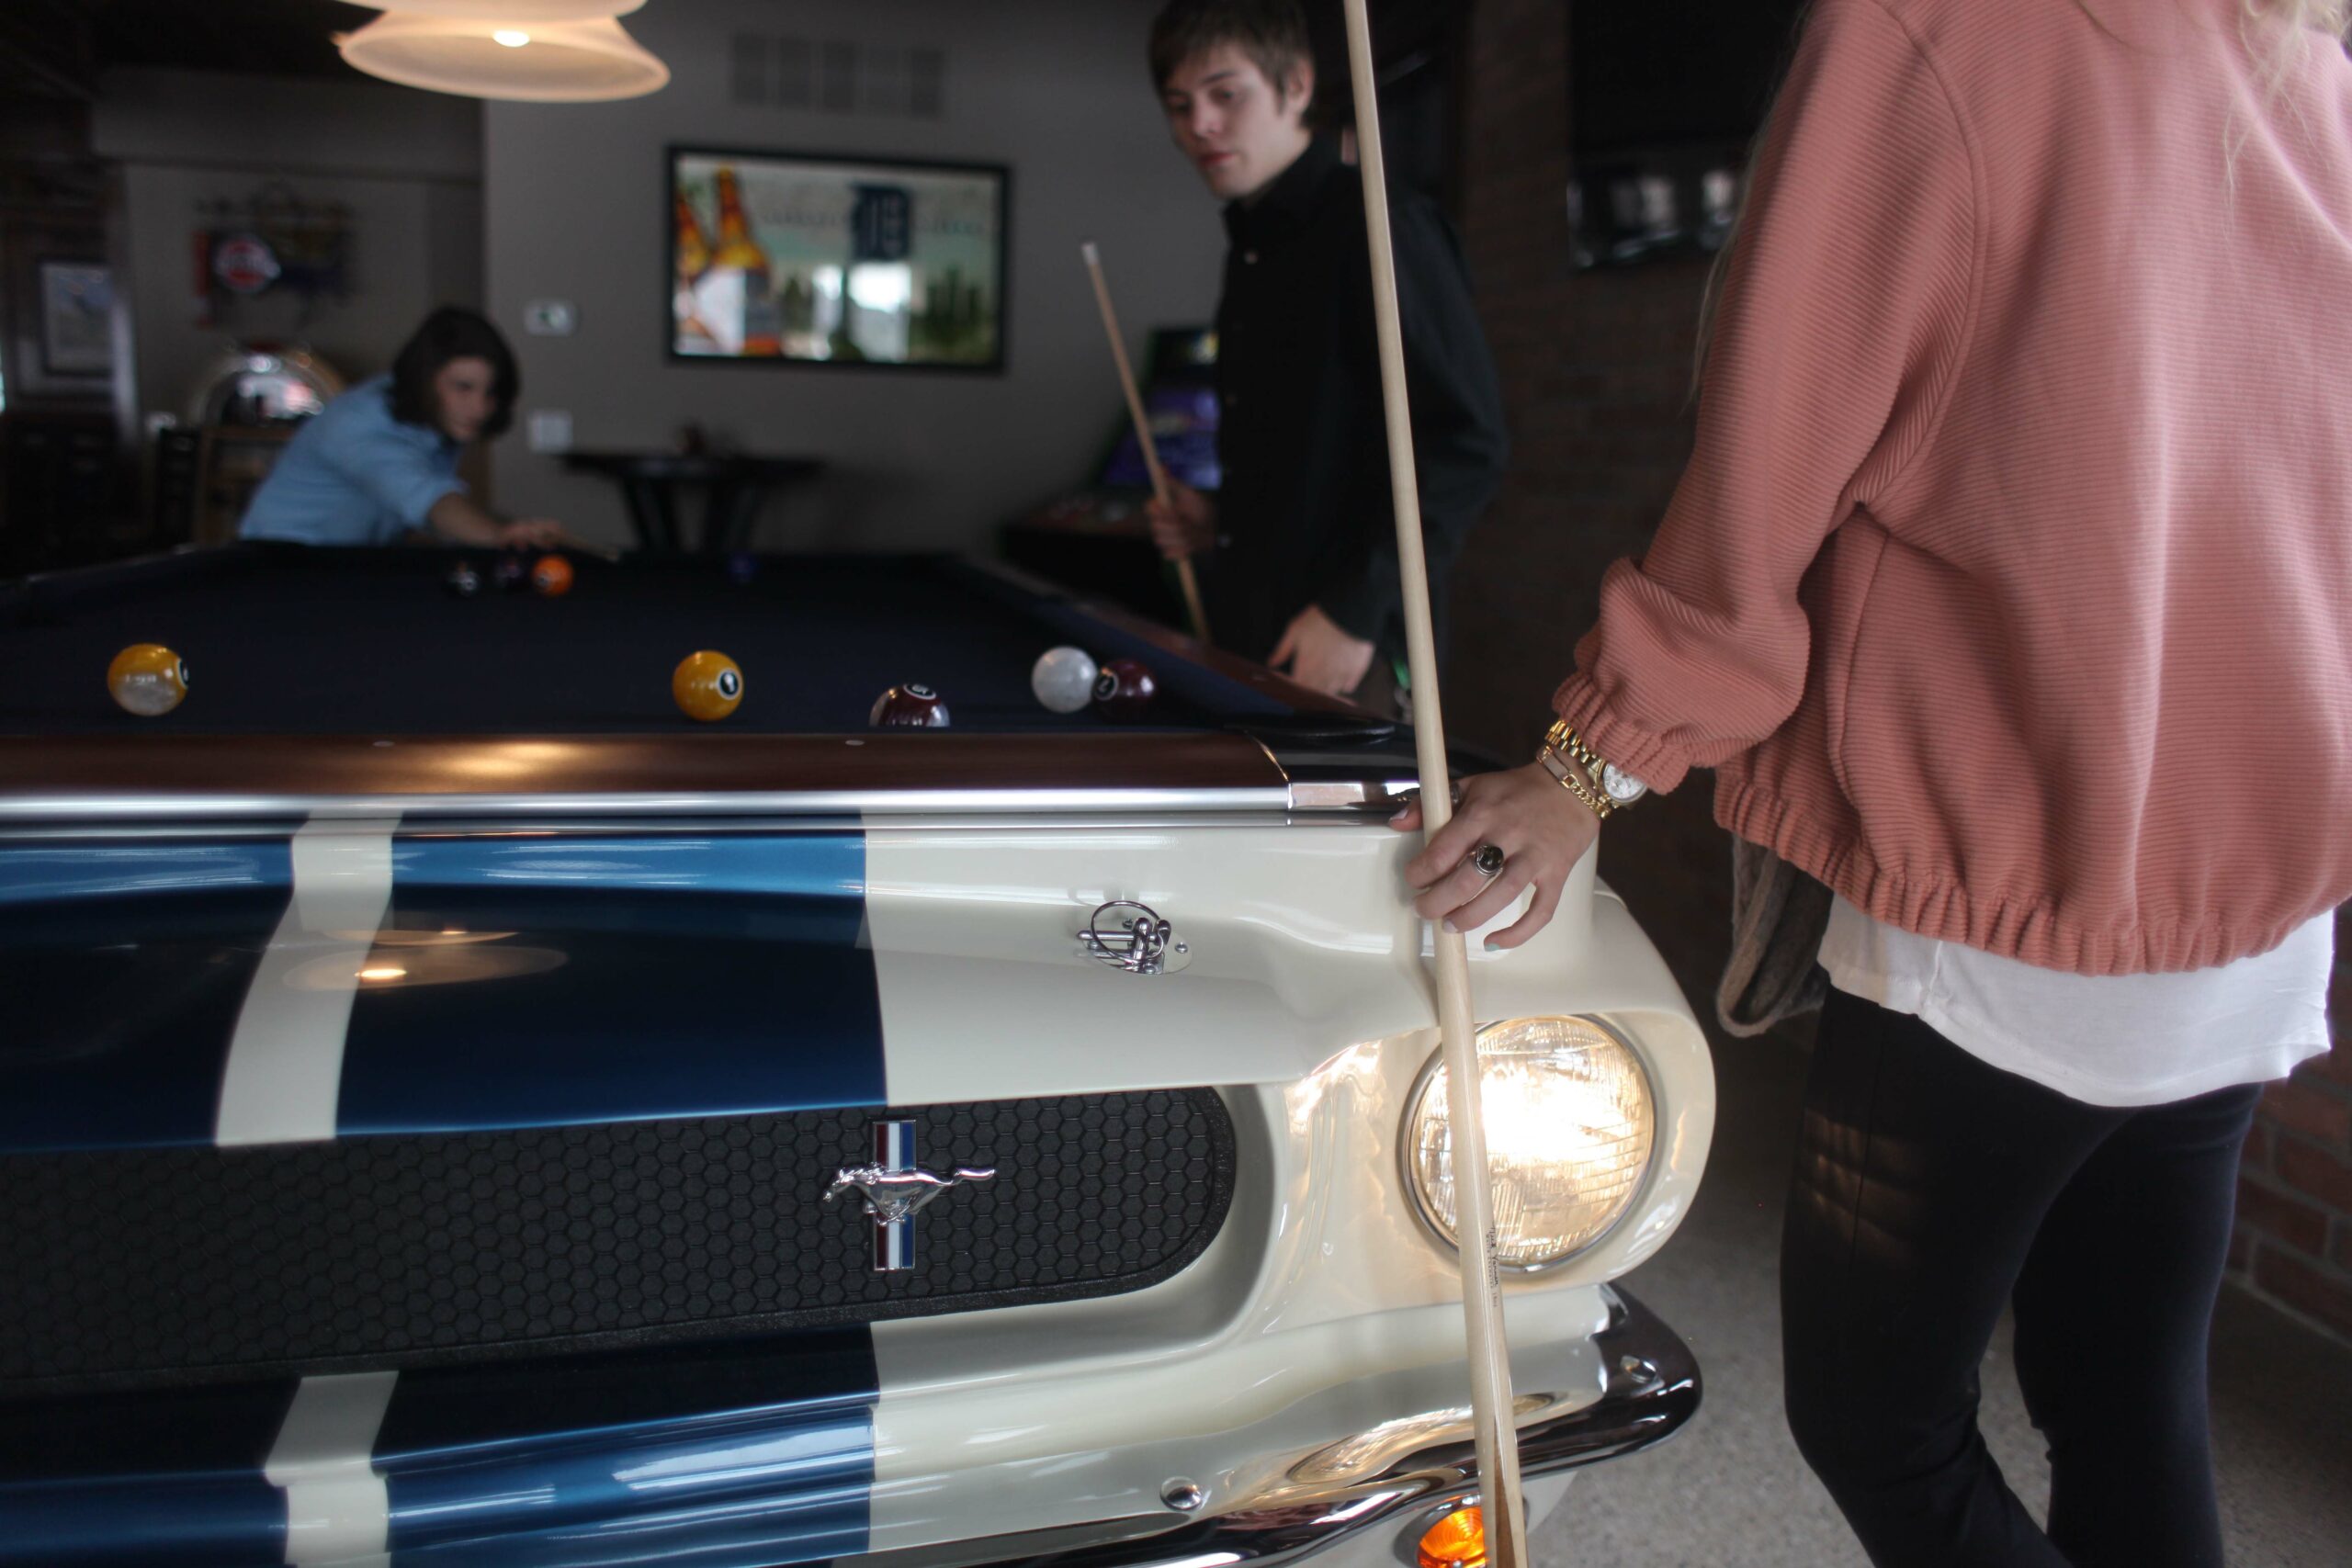 working headlights shown on the front right of a Ford Shelby GT-350 car pool table. Teens playing pool.